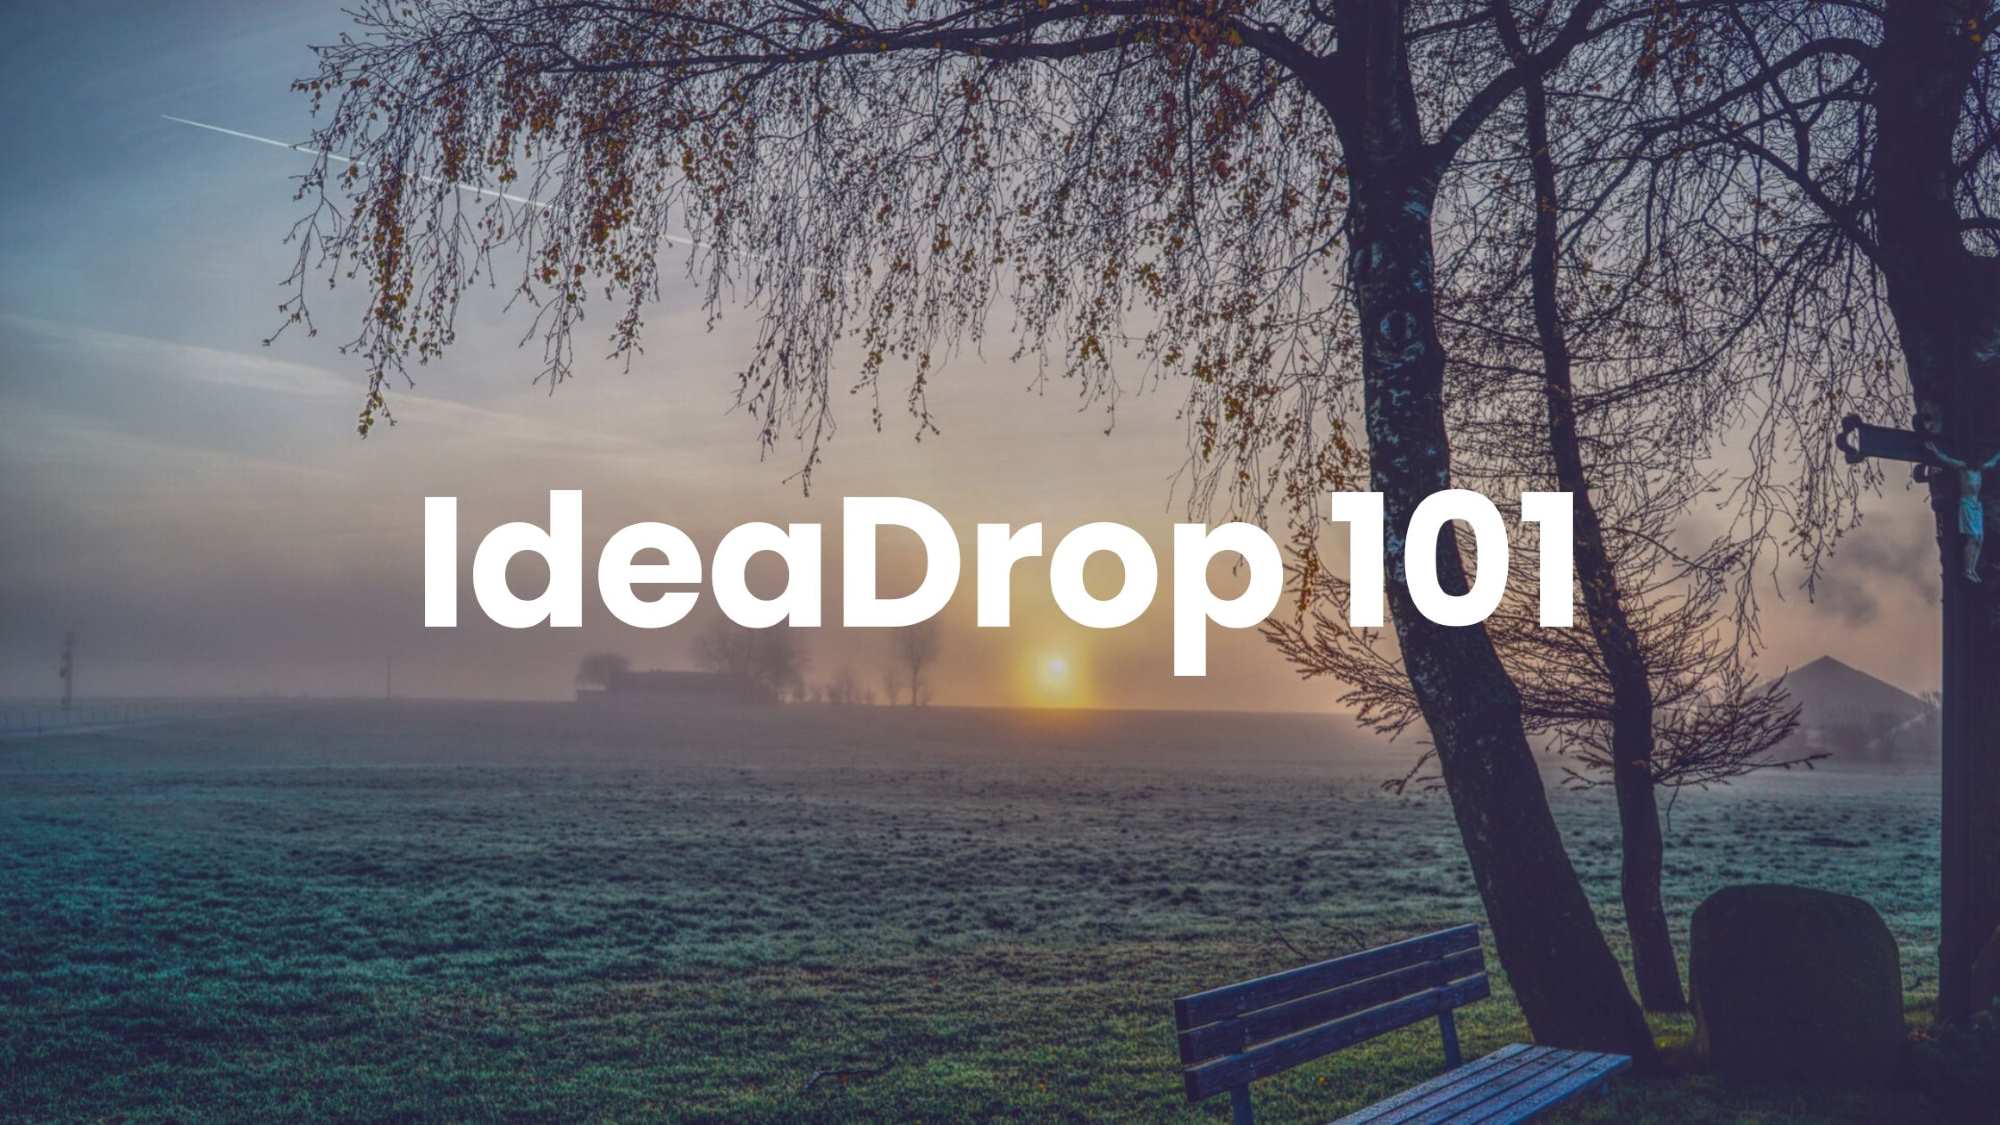 "Misty dawn with obscured home, park seat by tree, text 'IdeaDrop 101'."